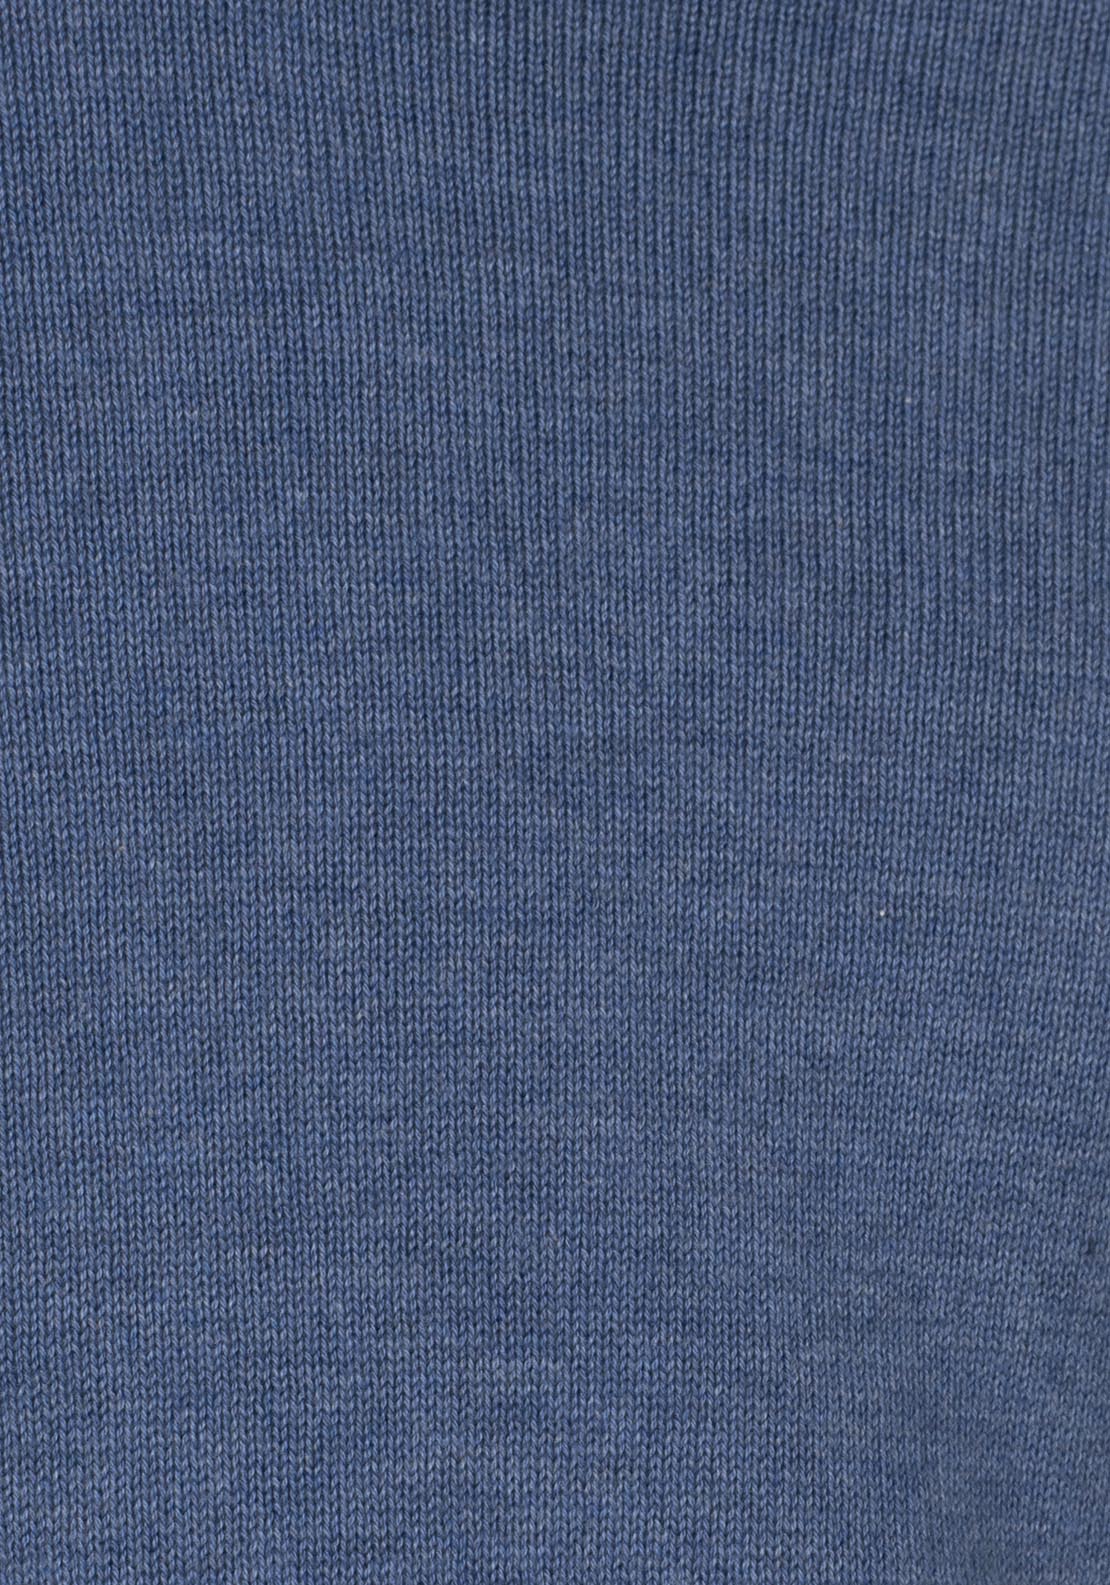 Yeats Plain Cotton V Neck Sweaters - Blue 7 Shaws Department Stores